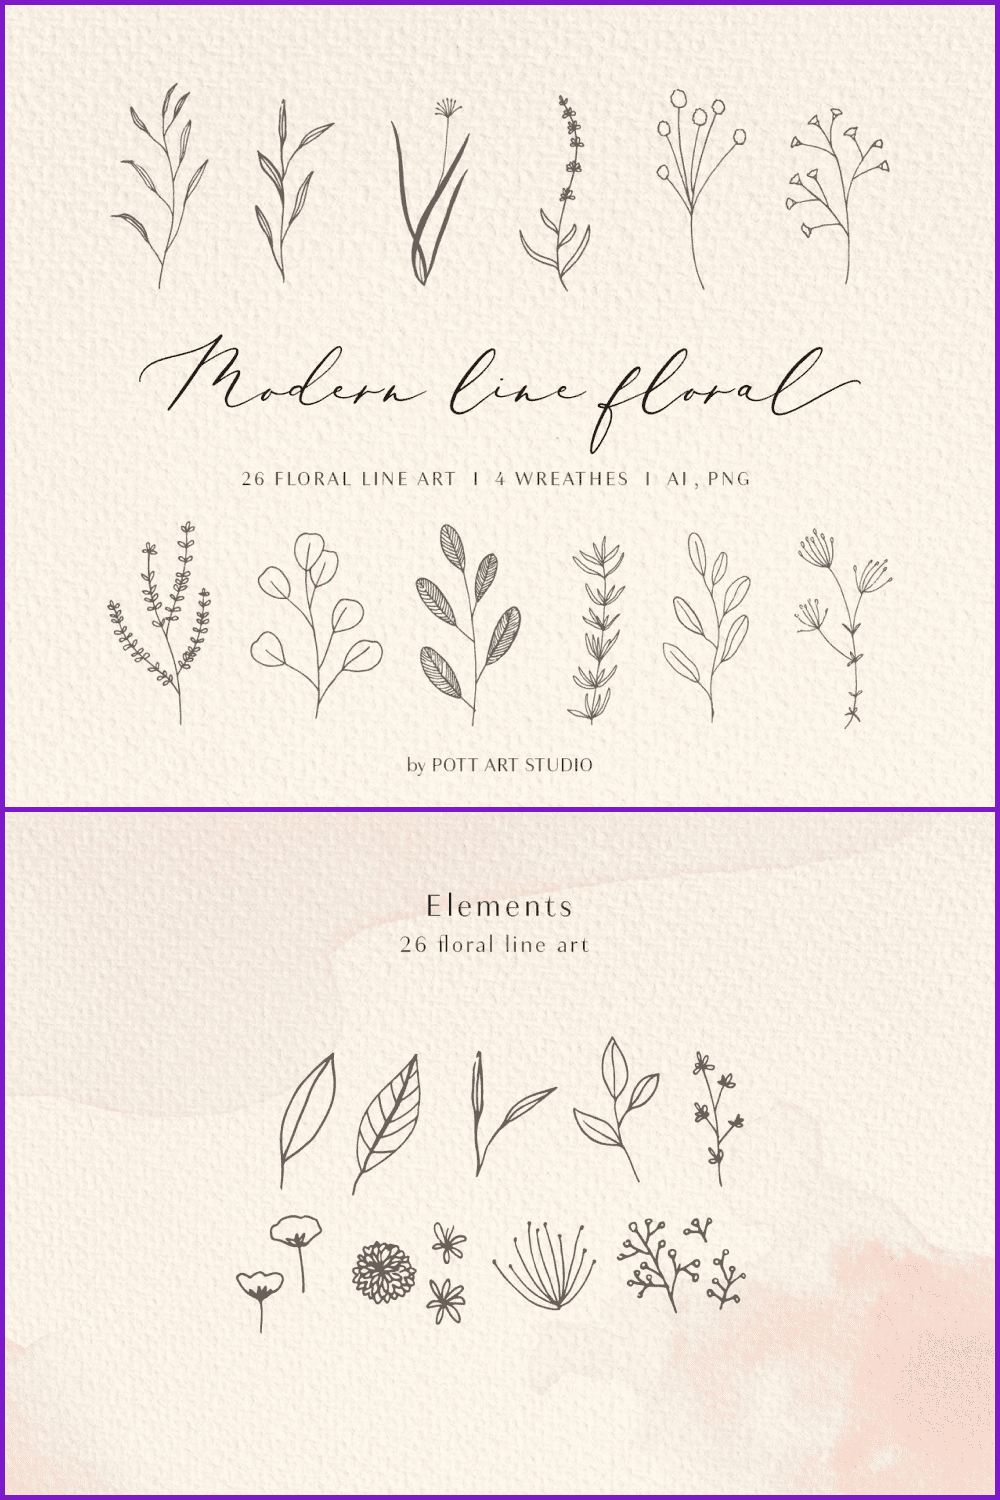 Sketches of wild flowers on a beige background.